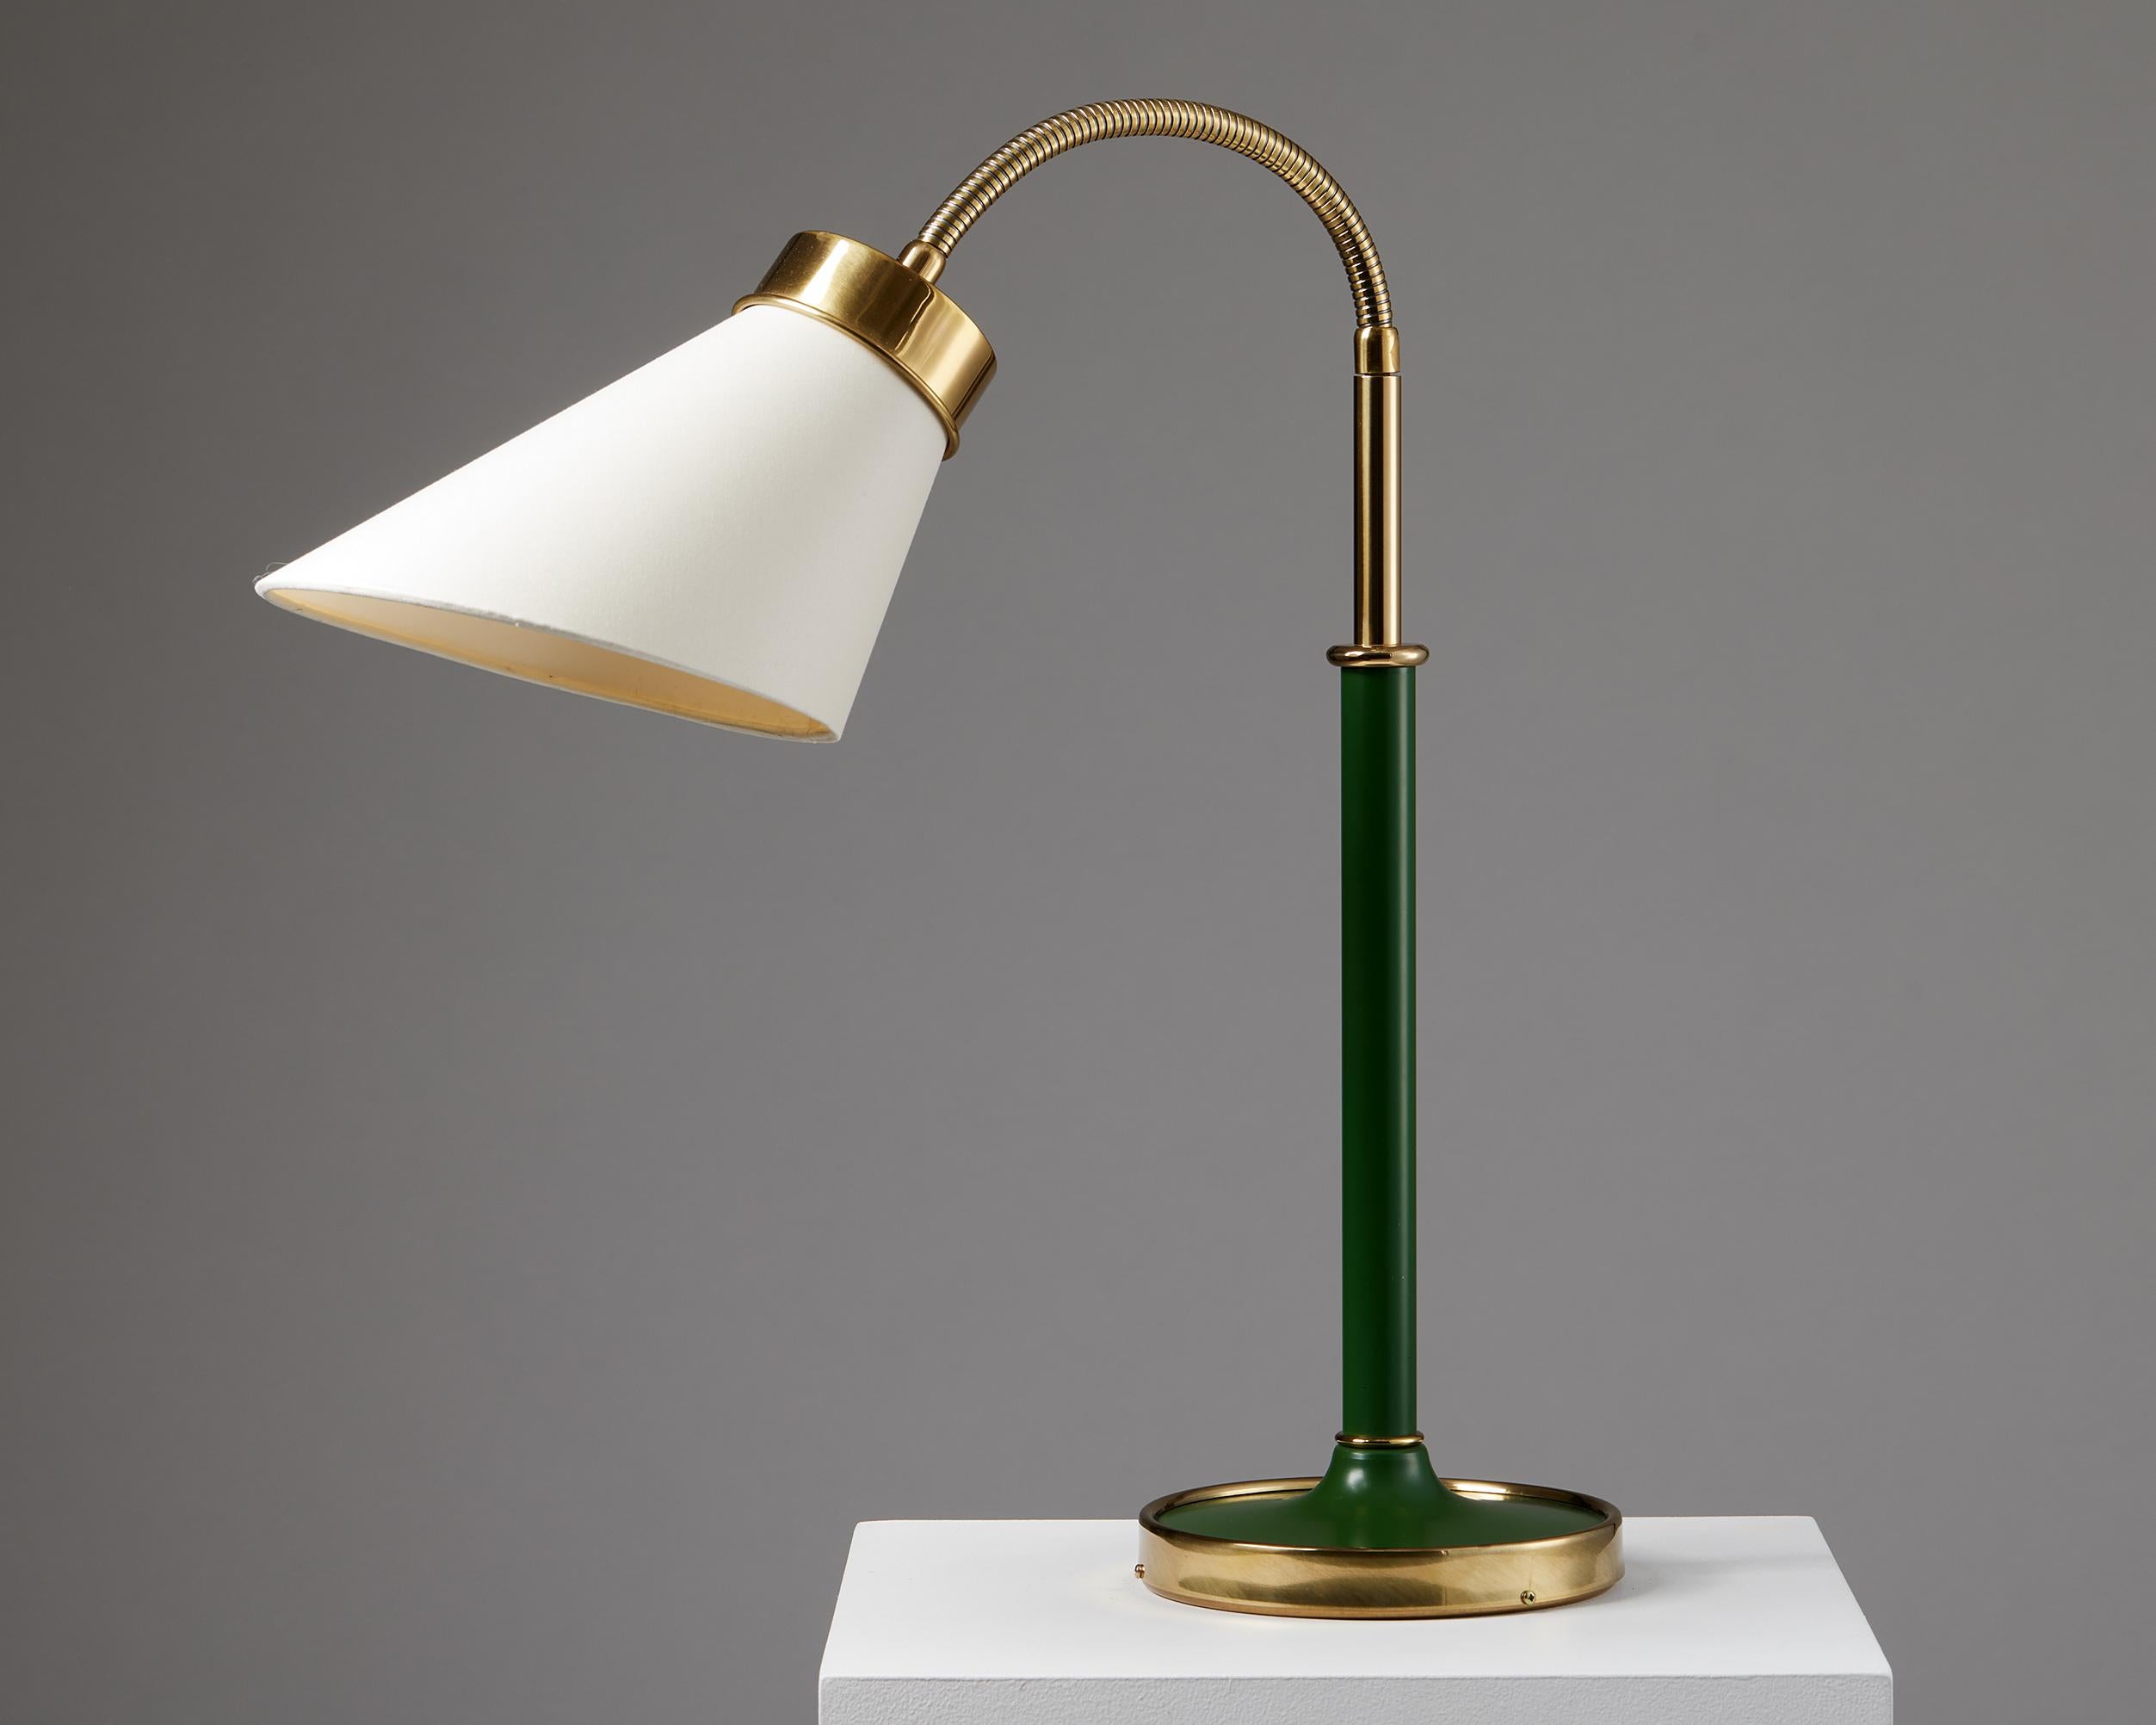 Table lamp model 2434 designed by Josef Frank for Svenskt Tenn,
Sweden, 1939.
Polished and lacquered brass with fabric shade.

Measures: H: 58 cm / 1' 10 1/2